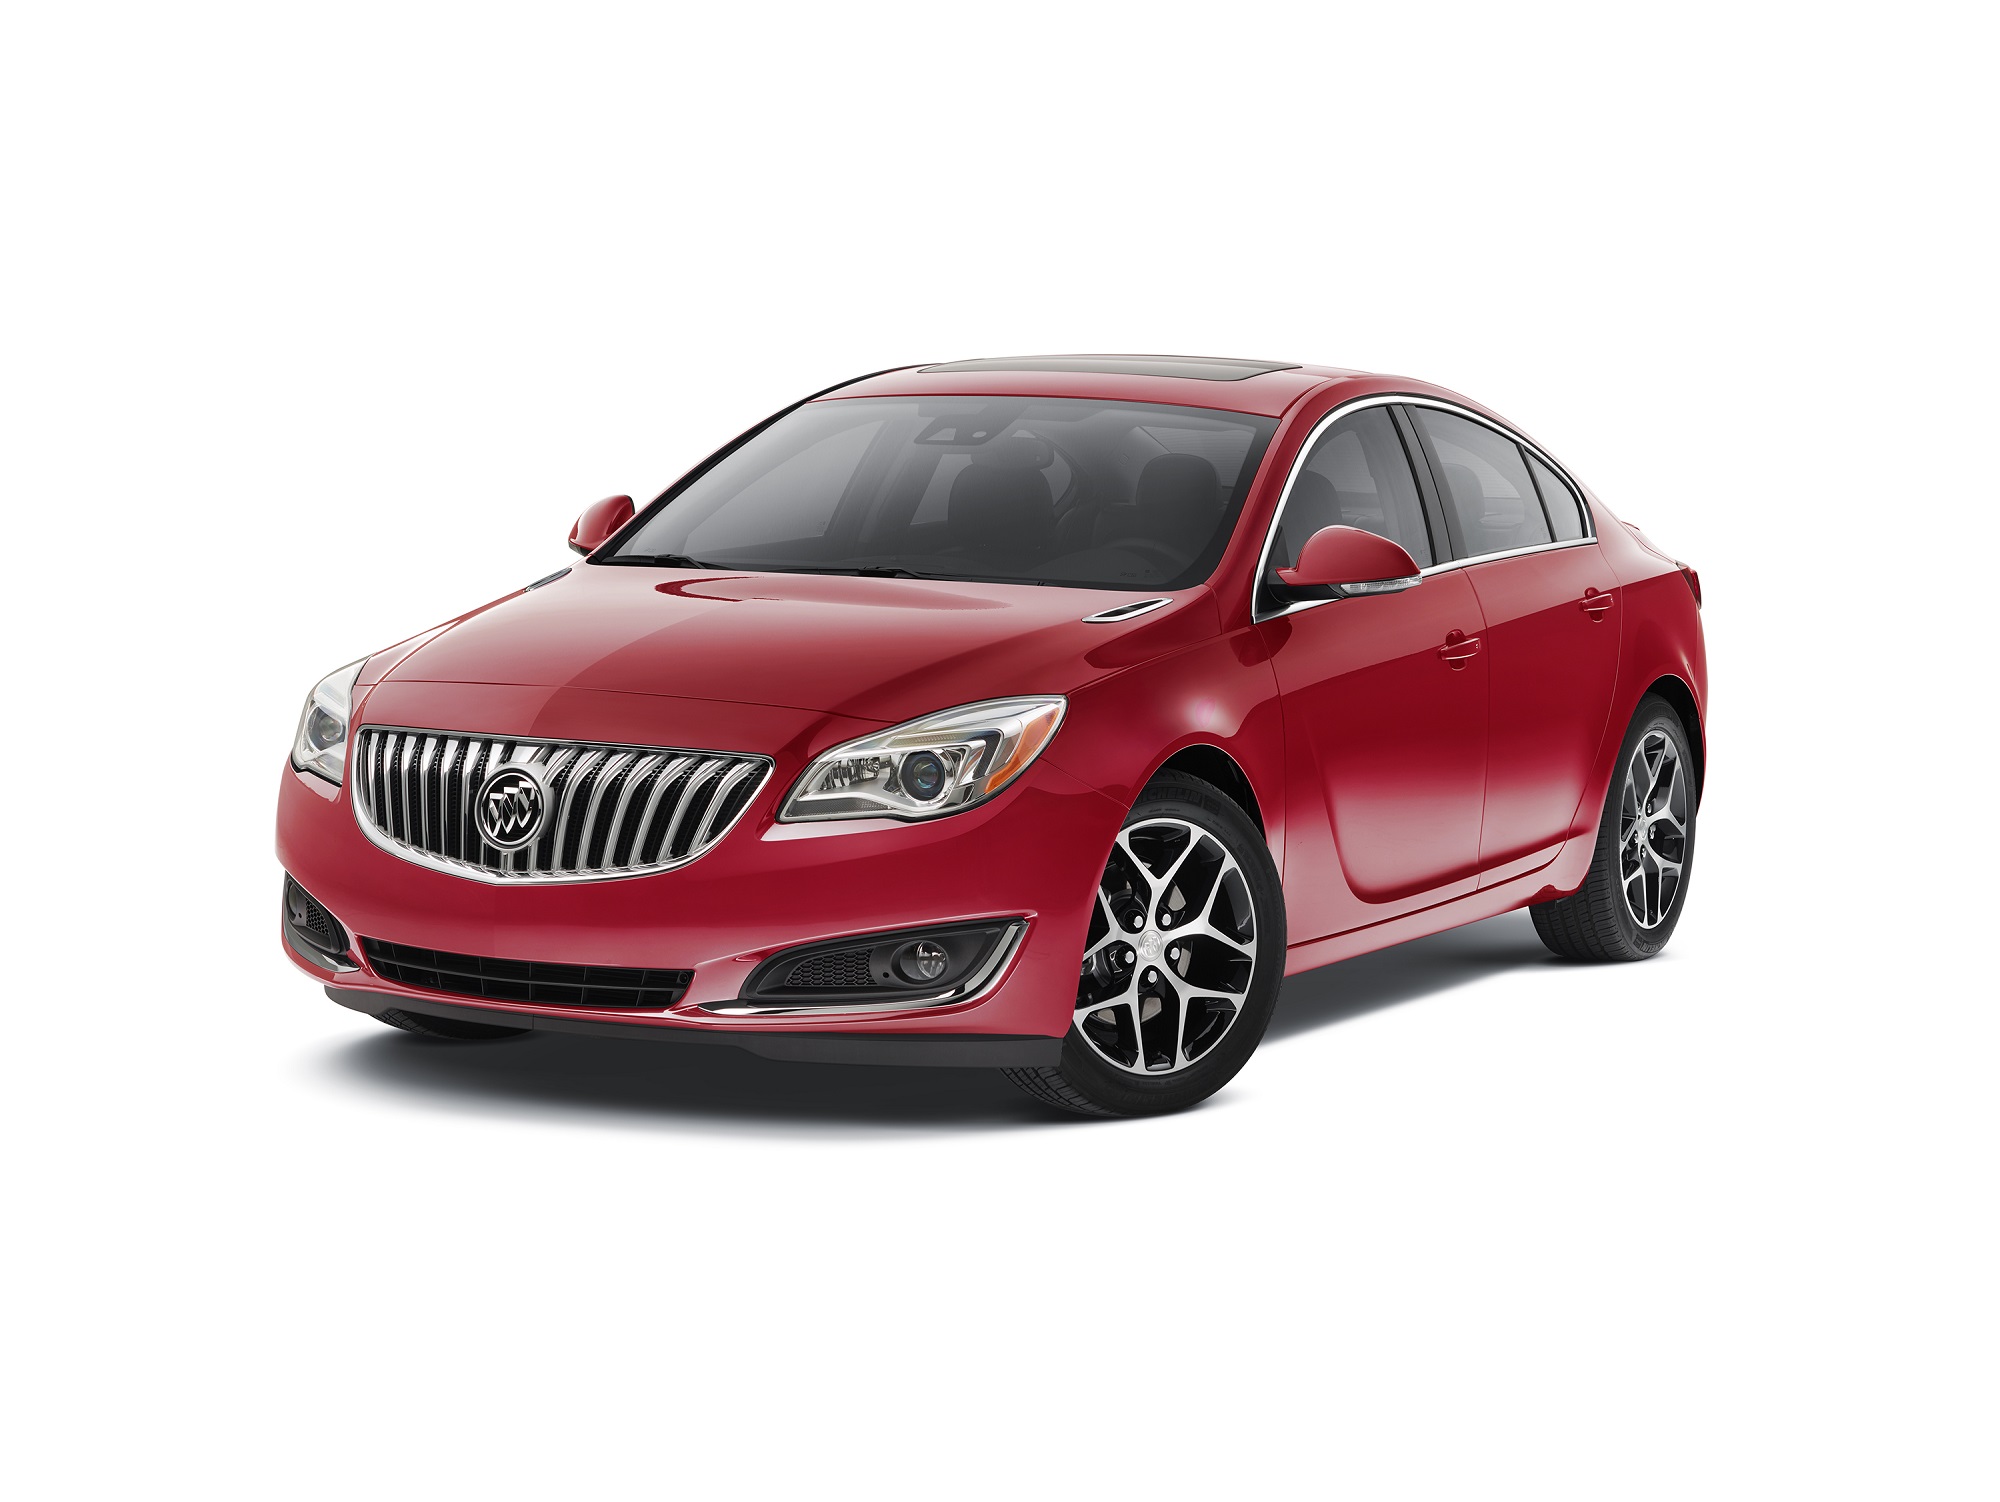 The 2017 Buick Regal is one of the best American sedan with optional AWD